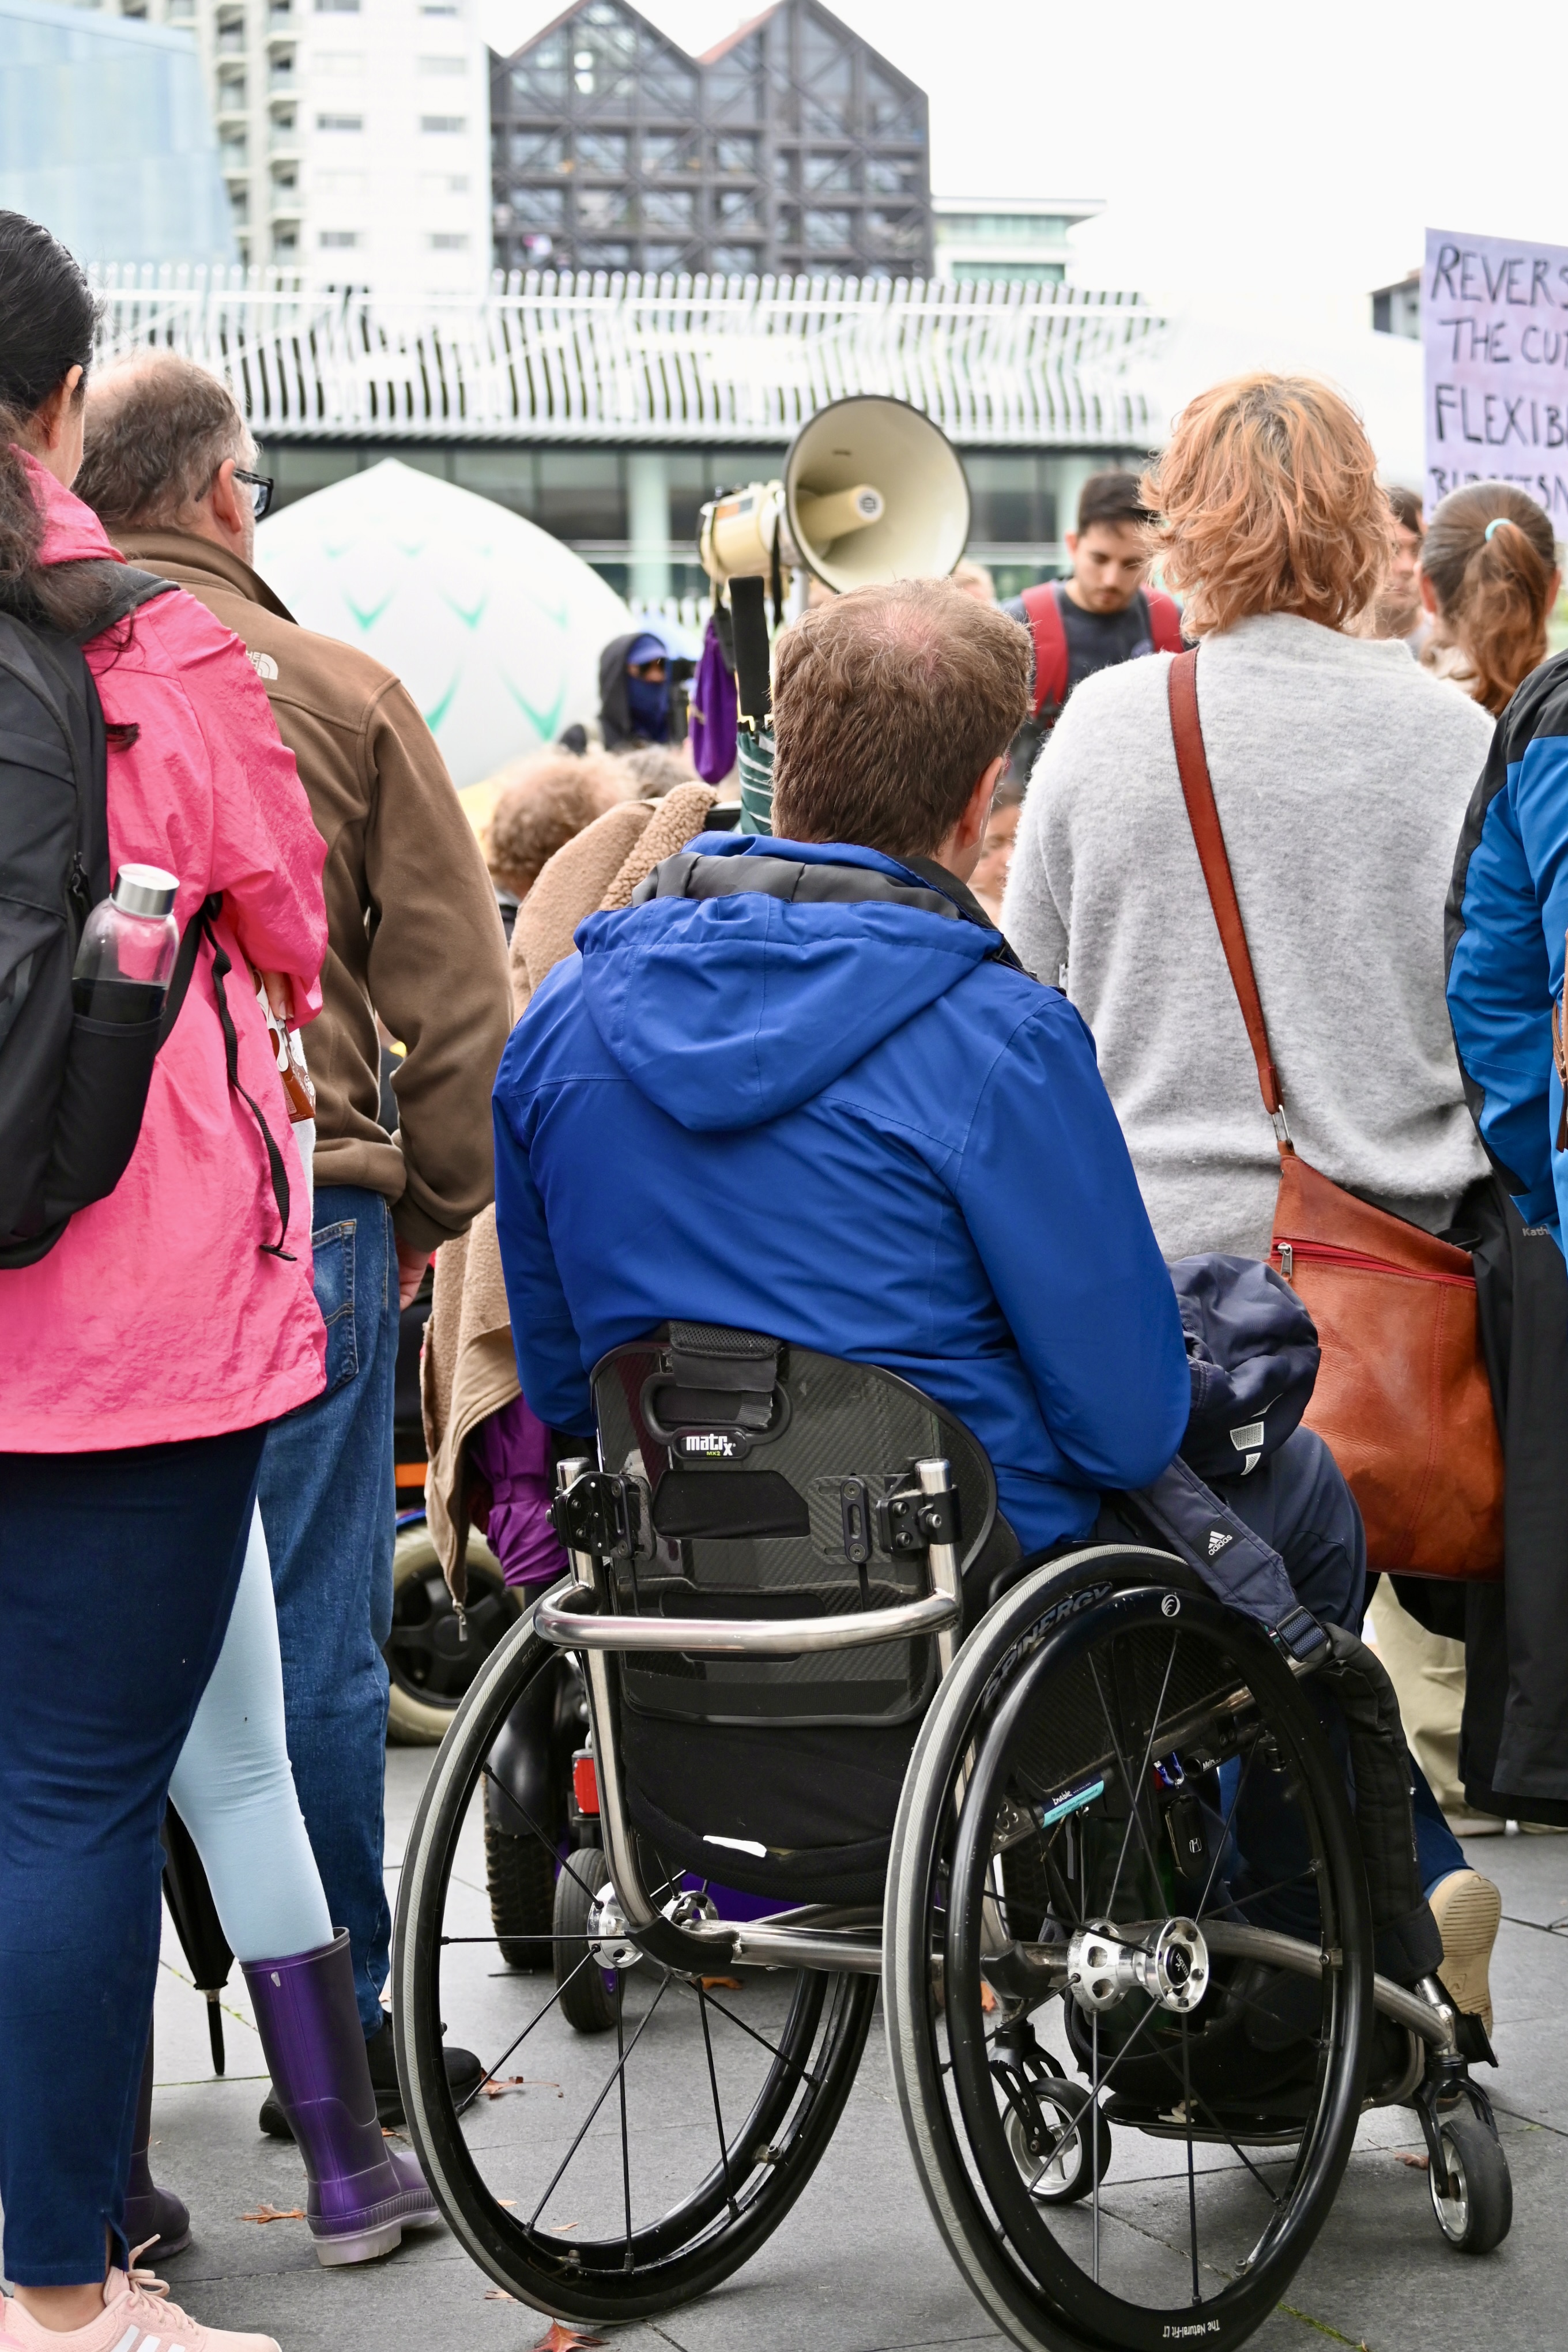 The back of a wheelchair-user wearing a blue jacket is among the crowd at a protest rally.